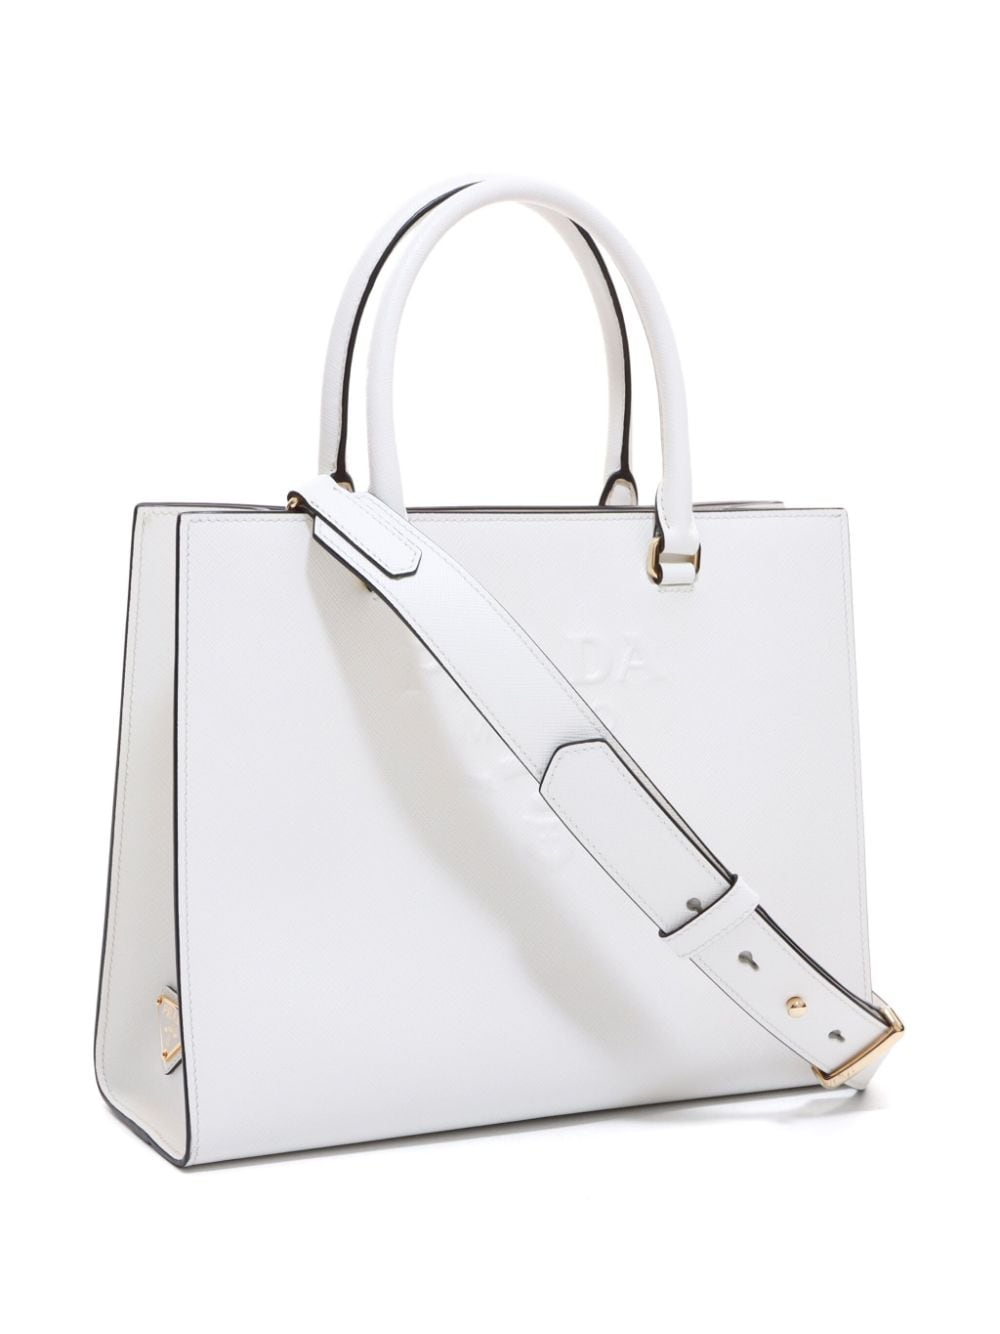 Pre-owned Prada Large Saffiano Leather Tote Bag In White